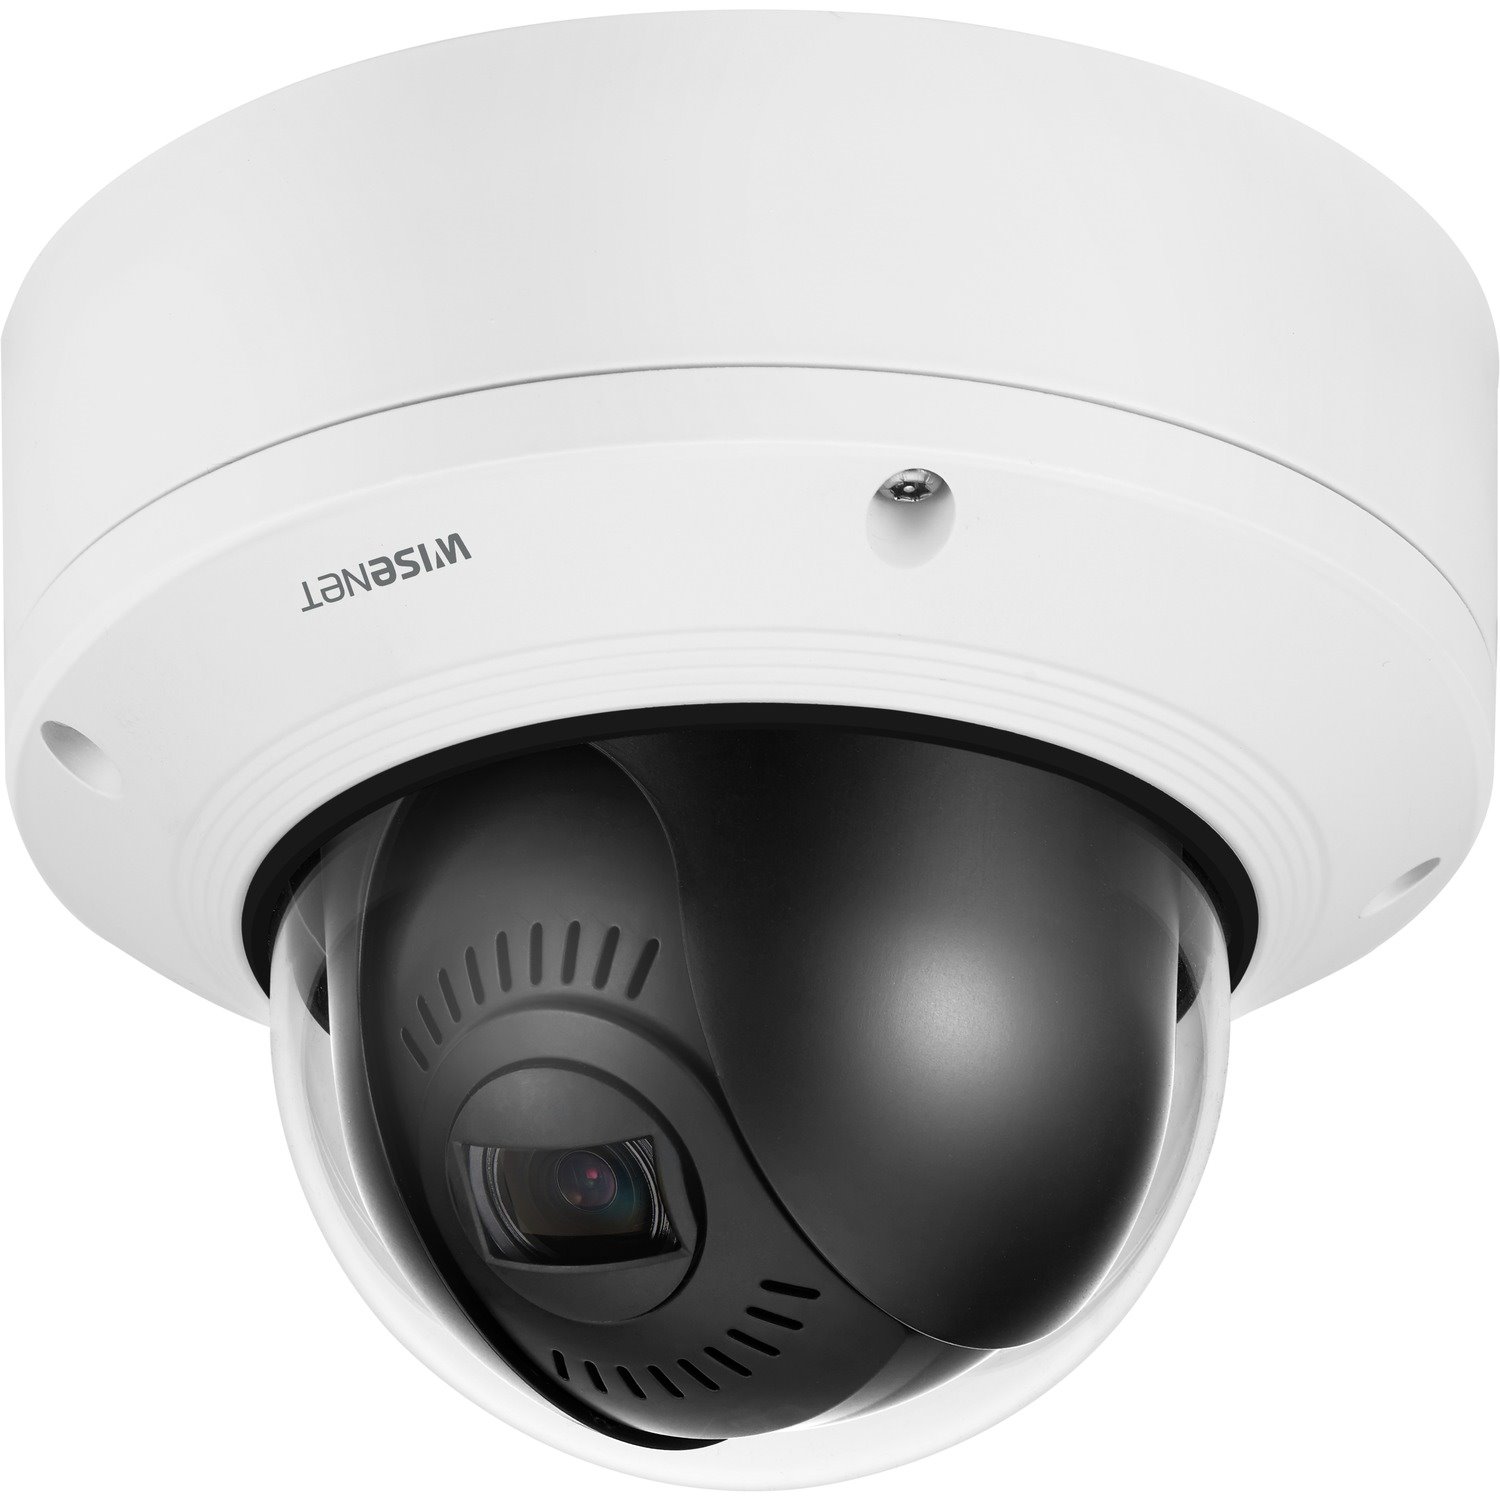 Wisenet XND-6081VZ 2 Megapixel Indoor HD Network Camera - Color, Monochrome - Dome - White